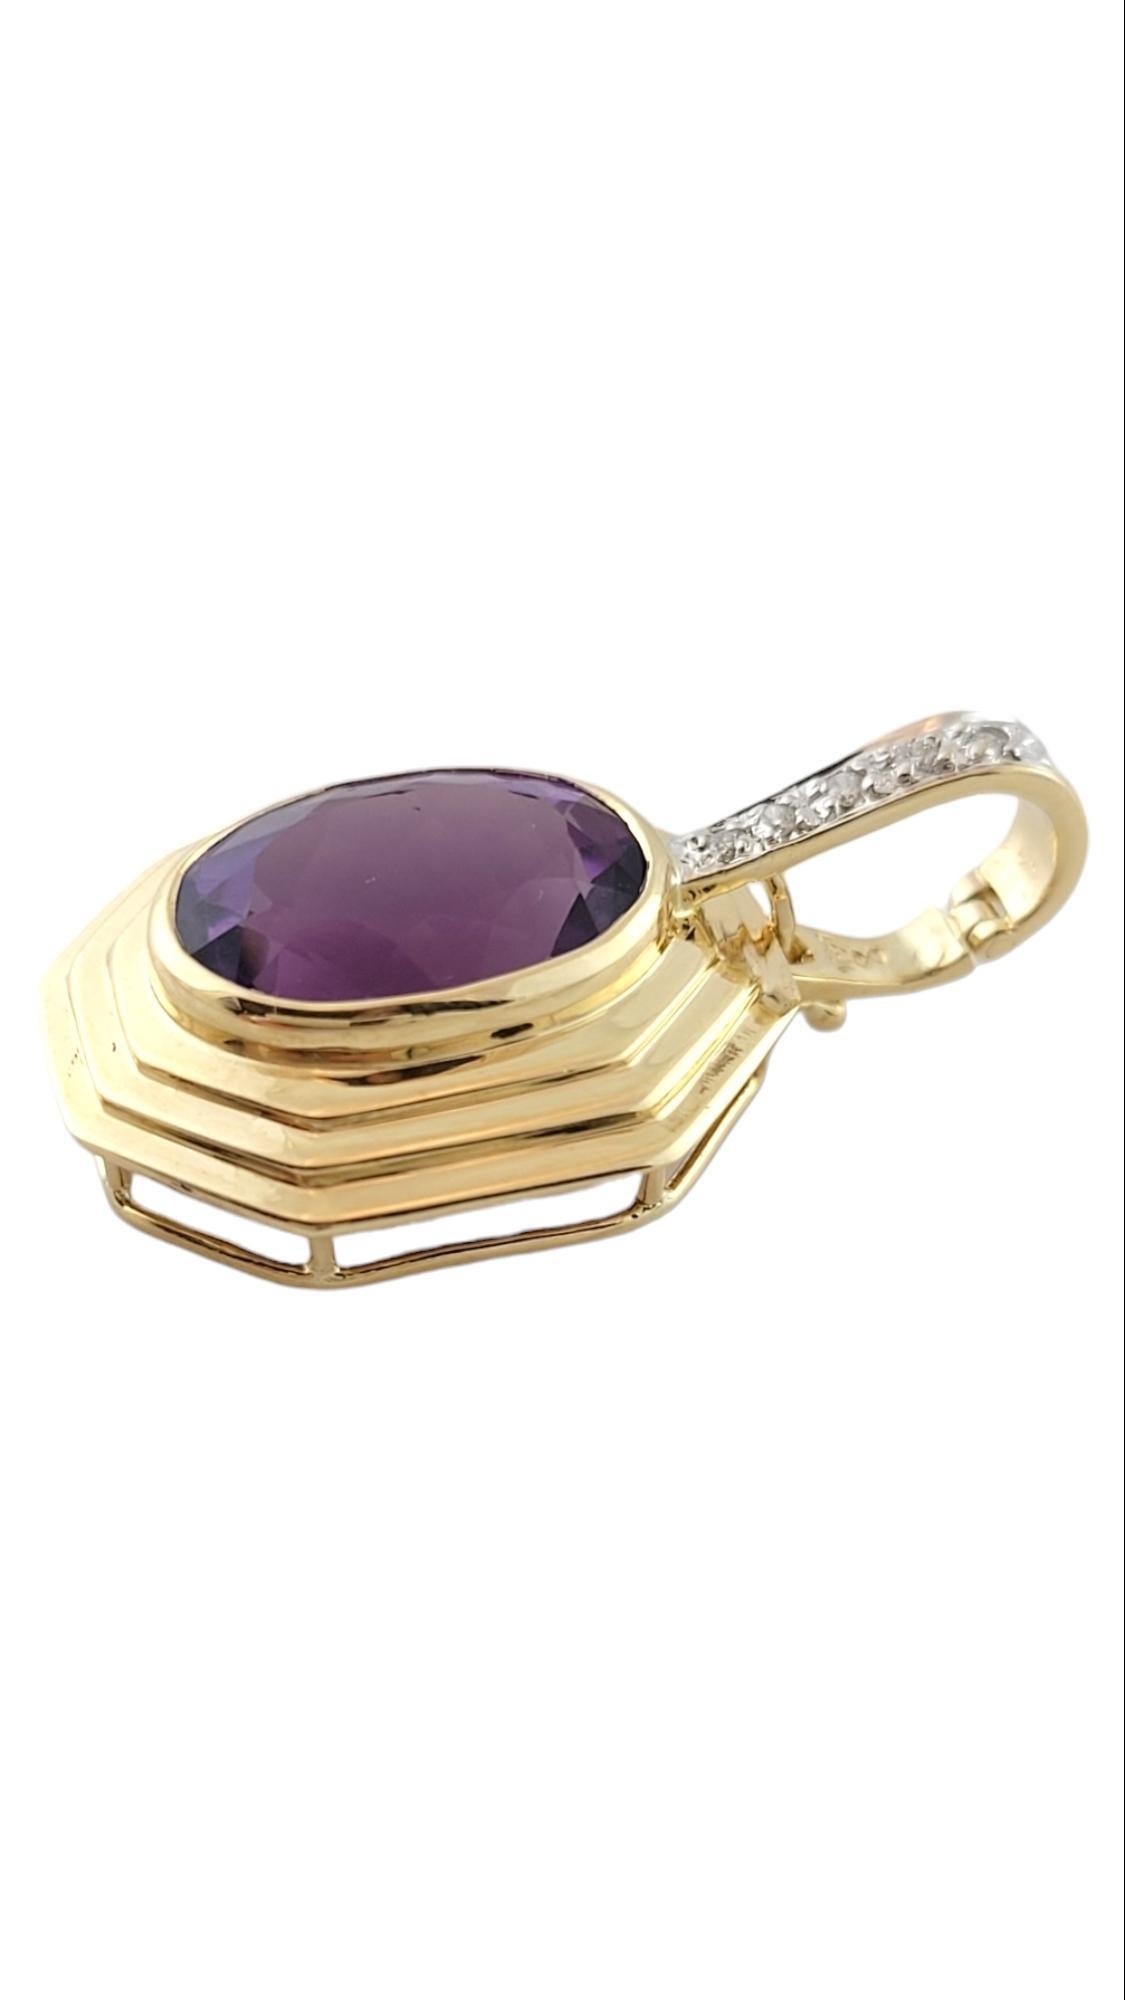 14K Yellow Gold Amethyst Diamond Pendant

This gorgeous 14K gold pendant has a beautiful amethyst stone in the center with 5 sparkling round brilliant cut diamonds on the bail!

Approximate total diamond weight: .05 cts

Diamond color: G

Diamond